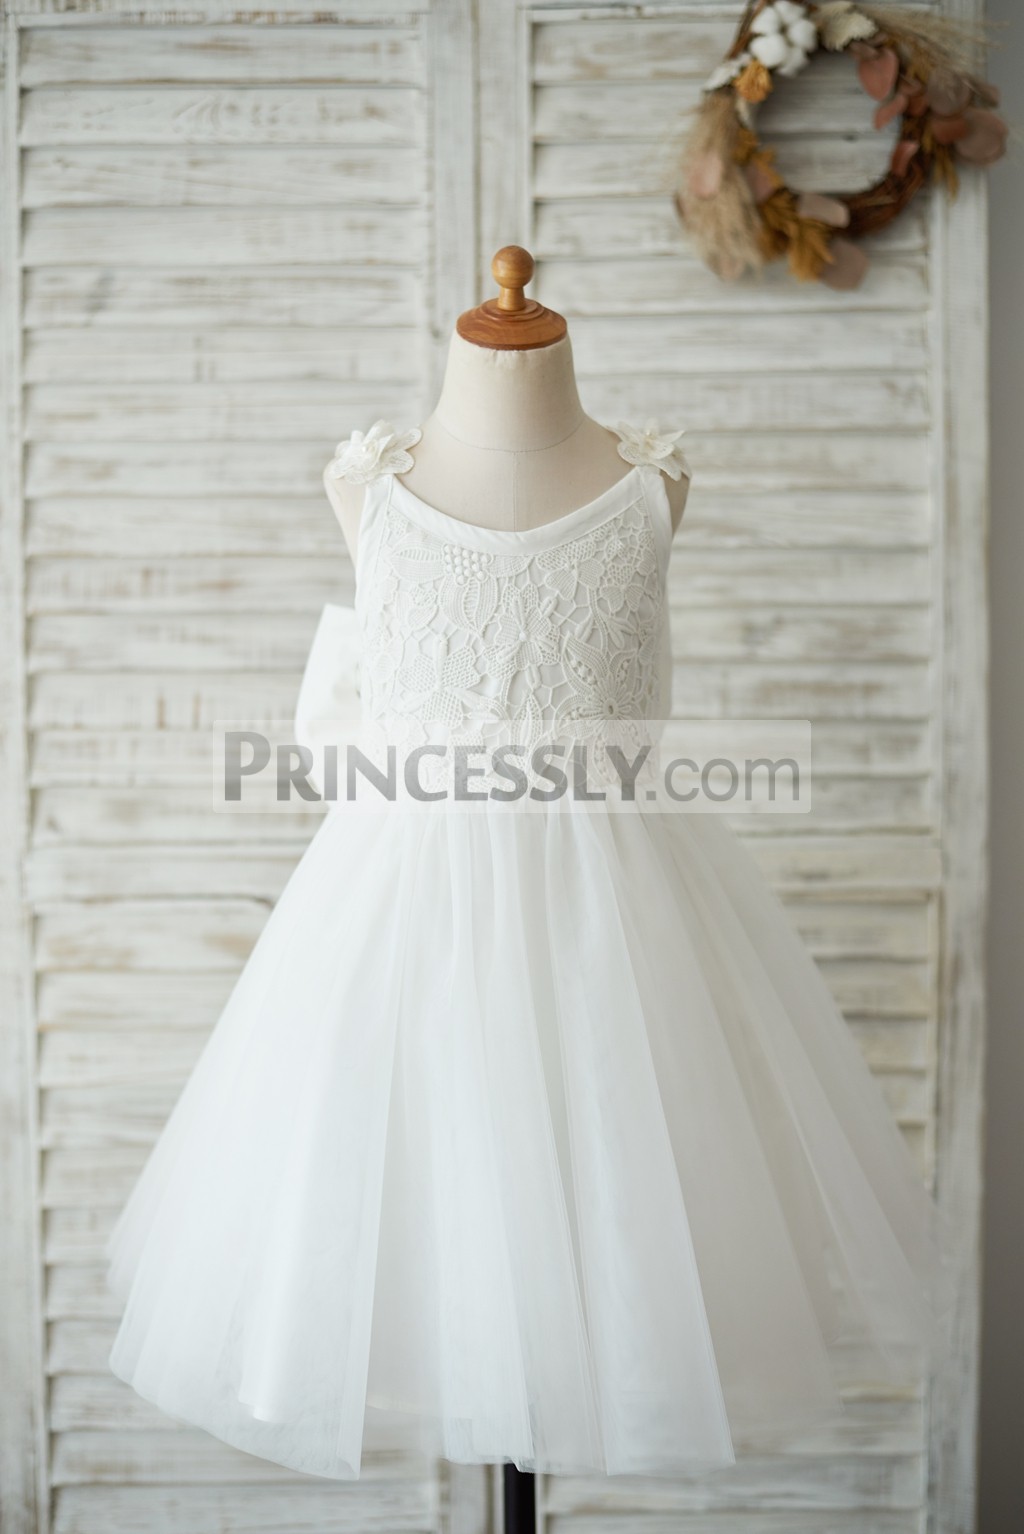 Lace tulle wedding baby girl dress in princess style